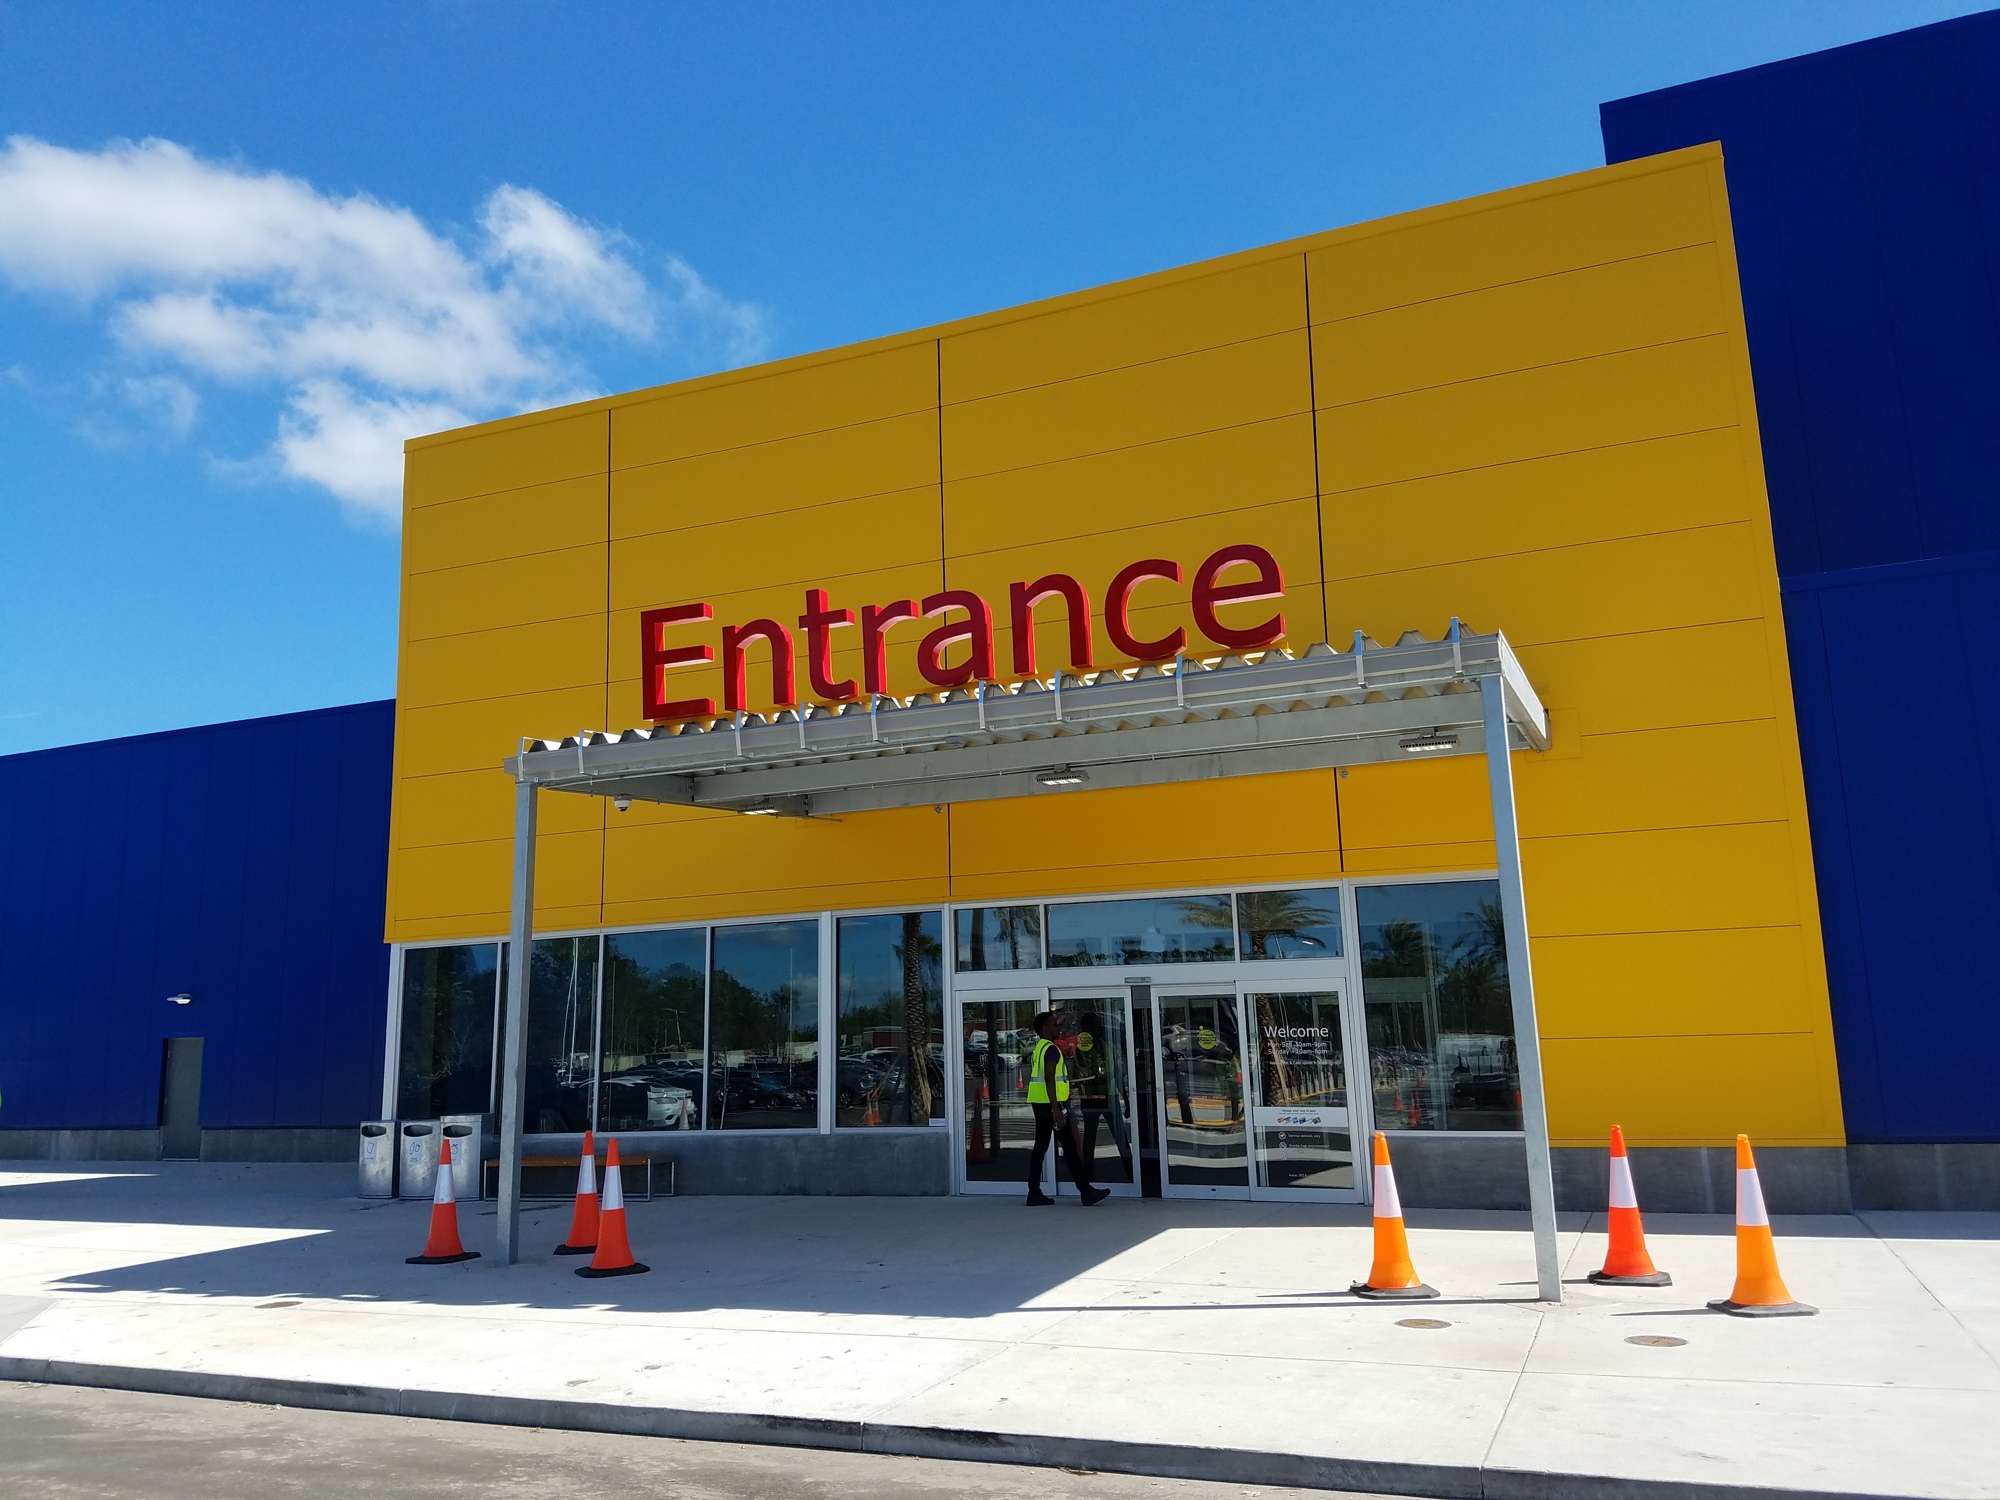 The Jacksonville Ikea will employ about 250 workers. The store will feature a restaurant, snack bar and supervised children’s play area.